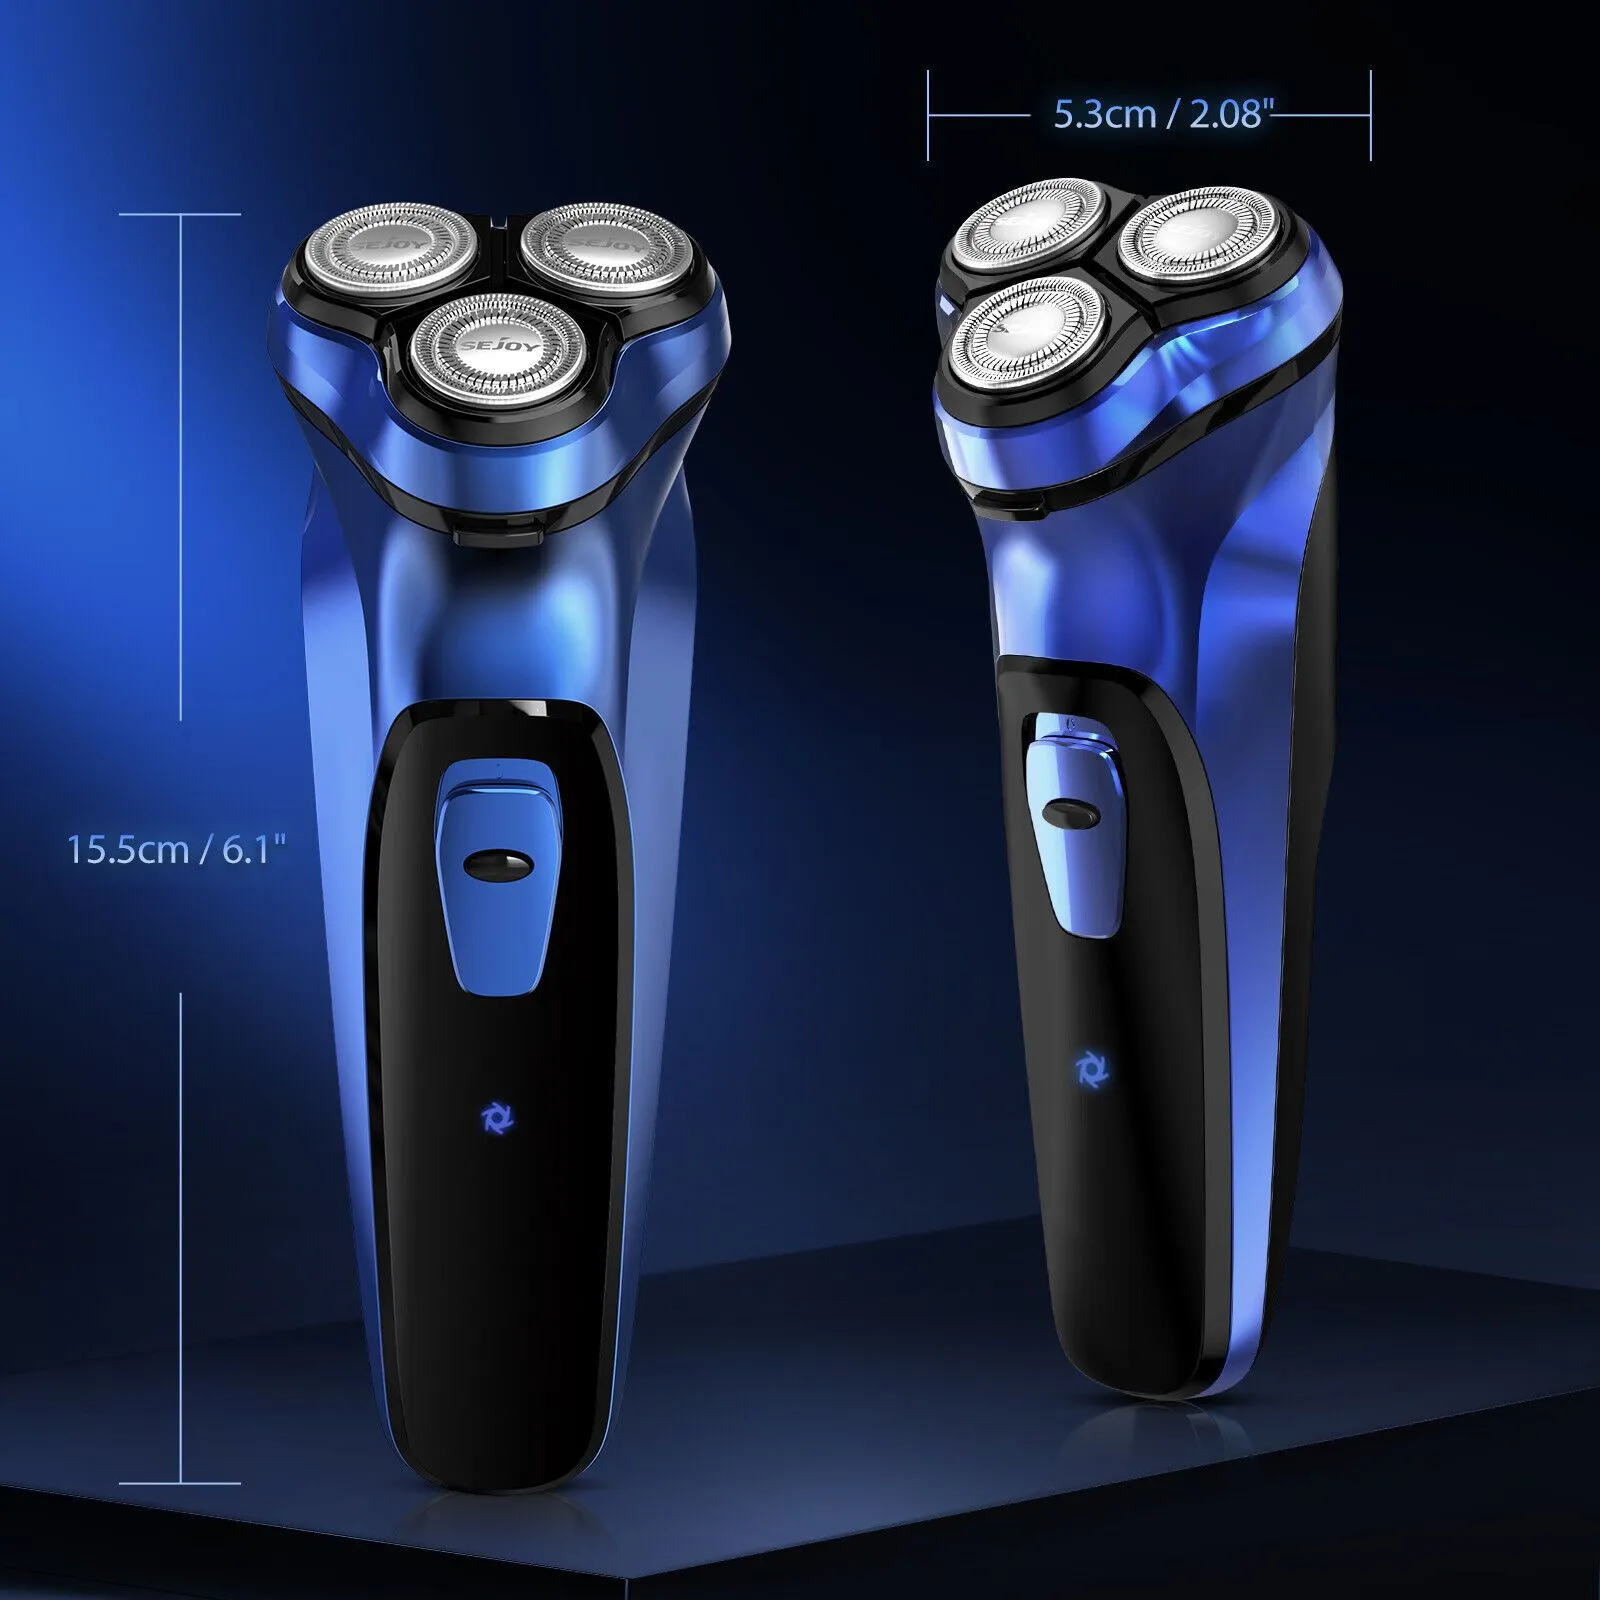 Men Rechargeable Electric Shaver -up Trimmer Rotary Razor Beard Shaving